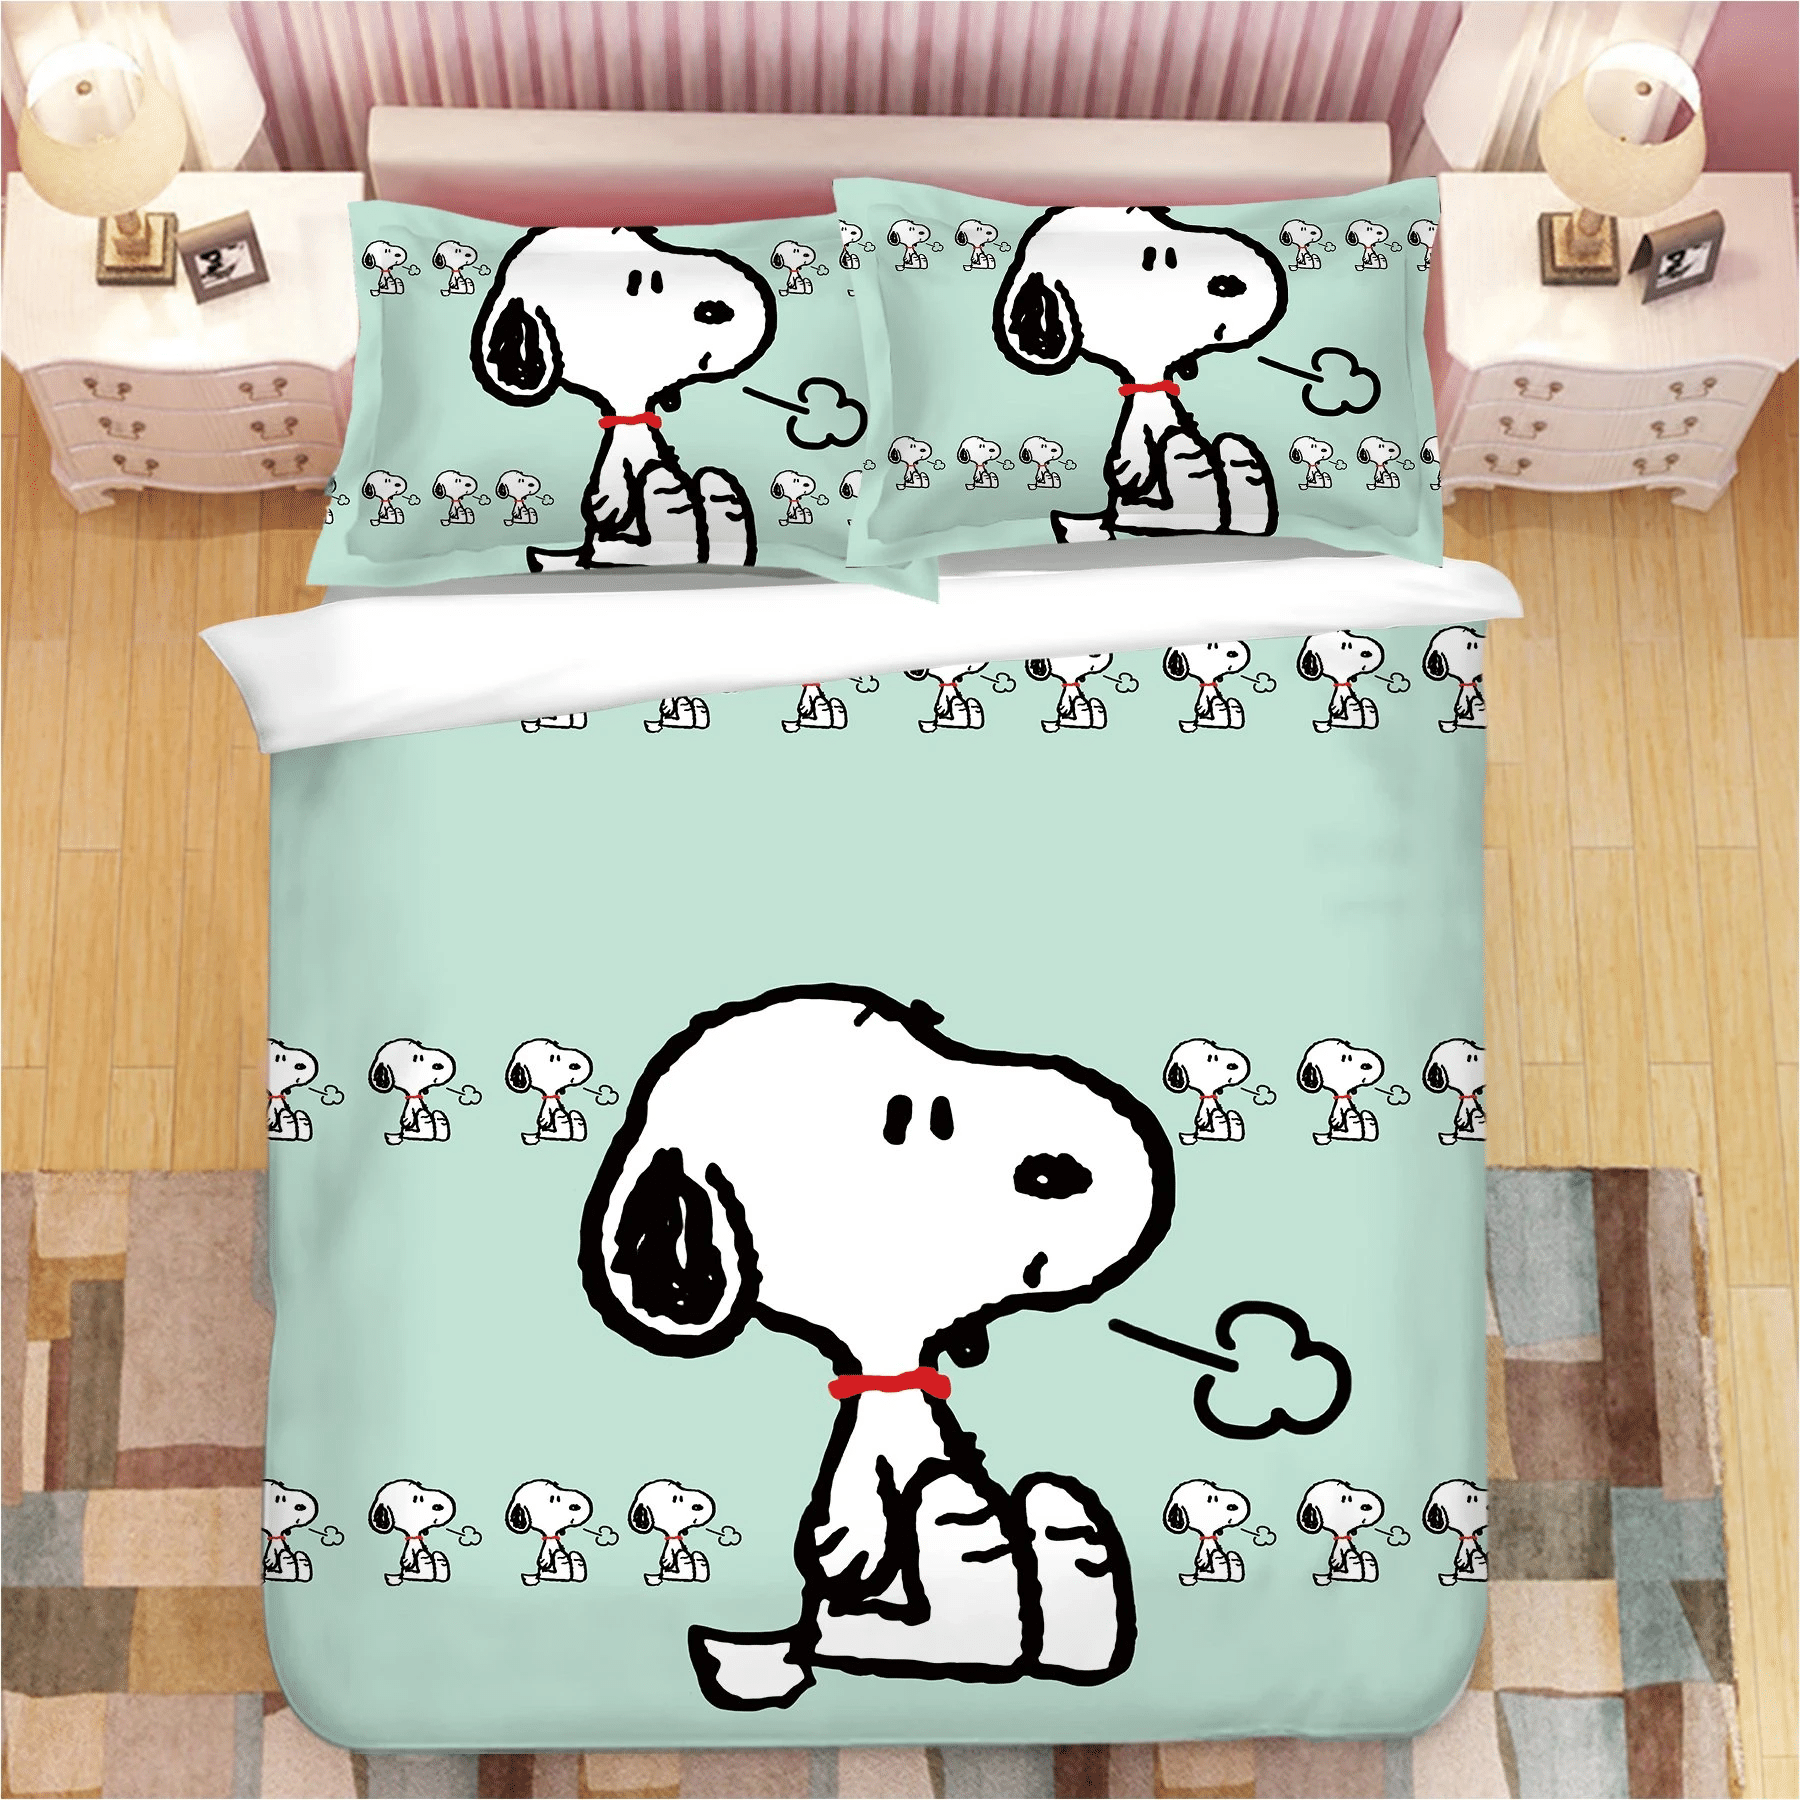 Snoopy 2 Duvet Cover Quilt Cover Pillowcase Bedding Sets Bed